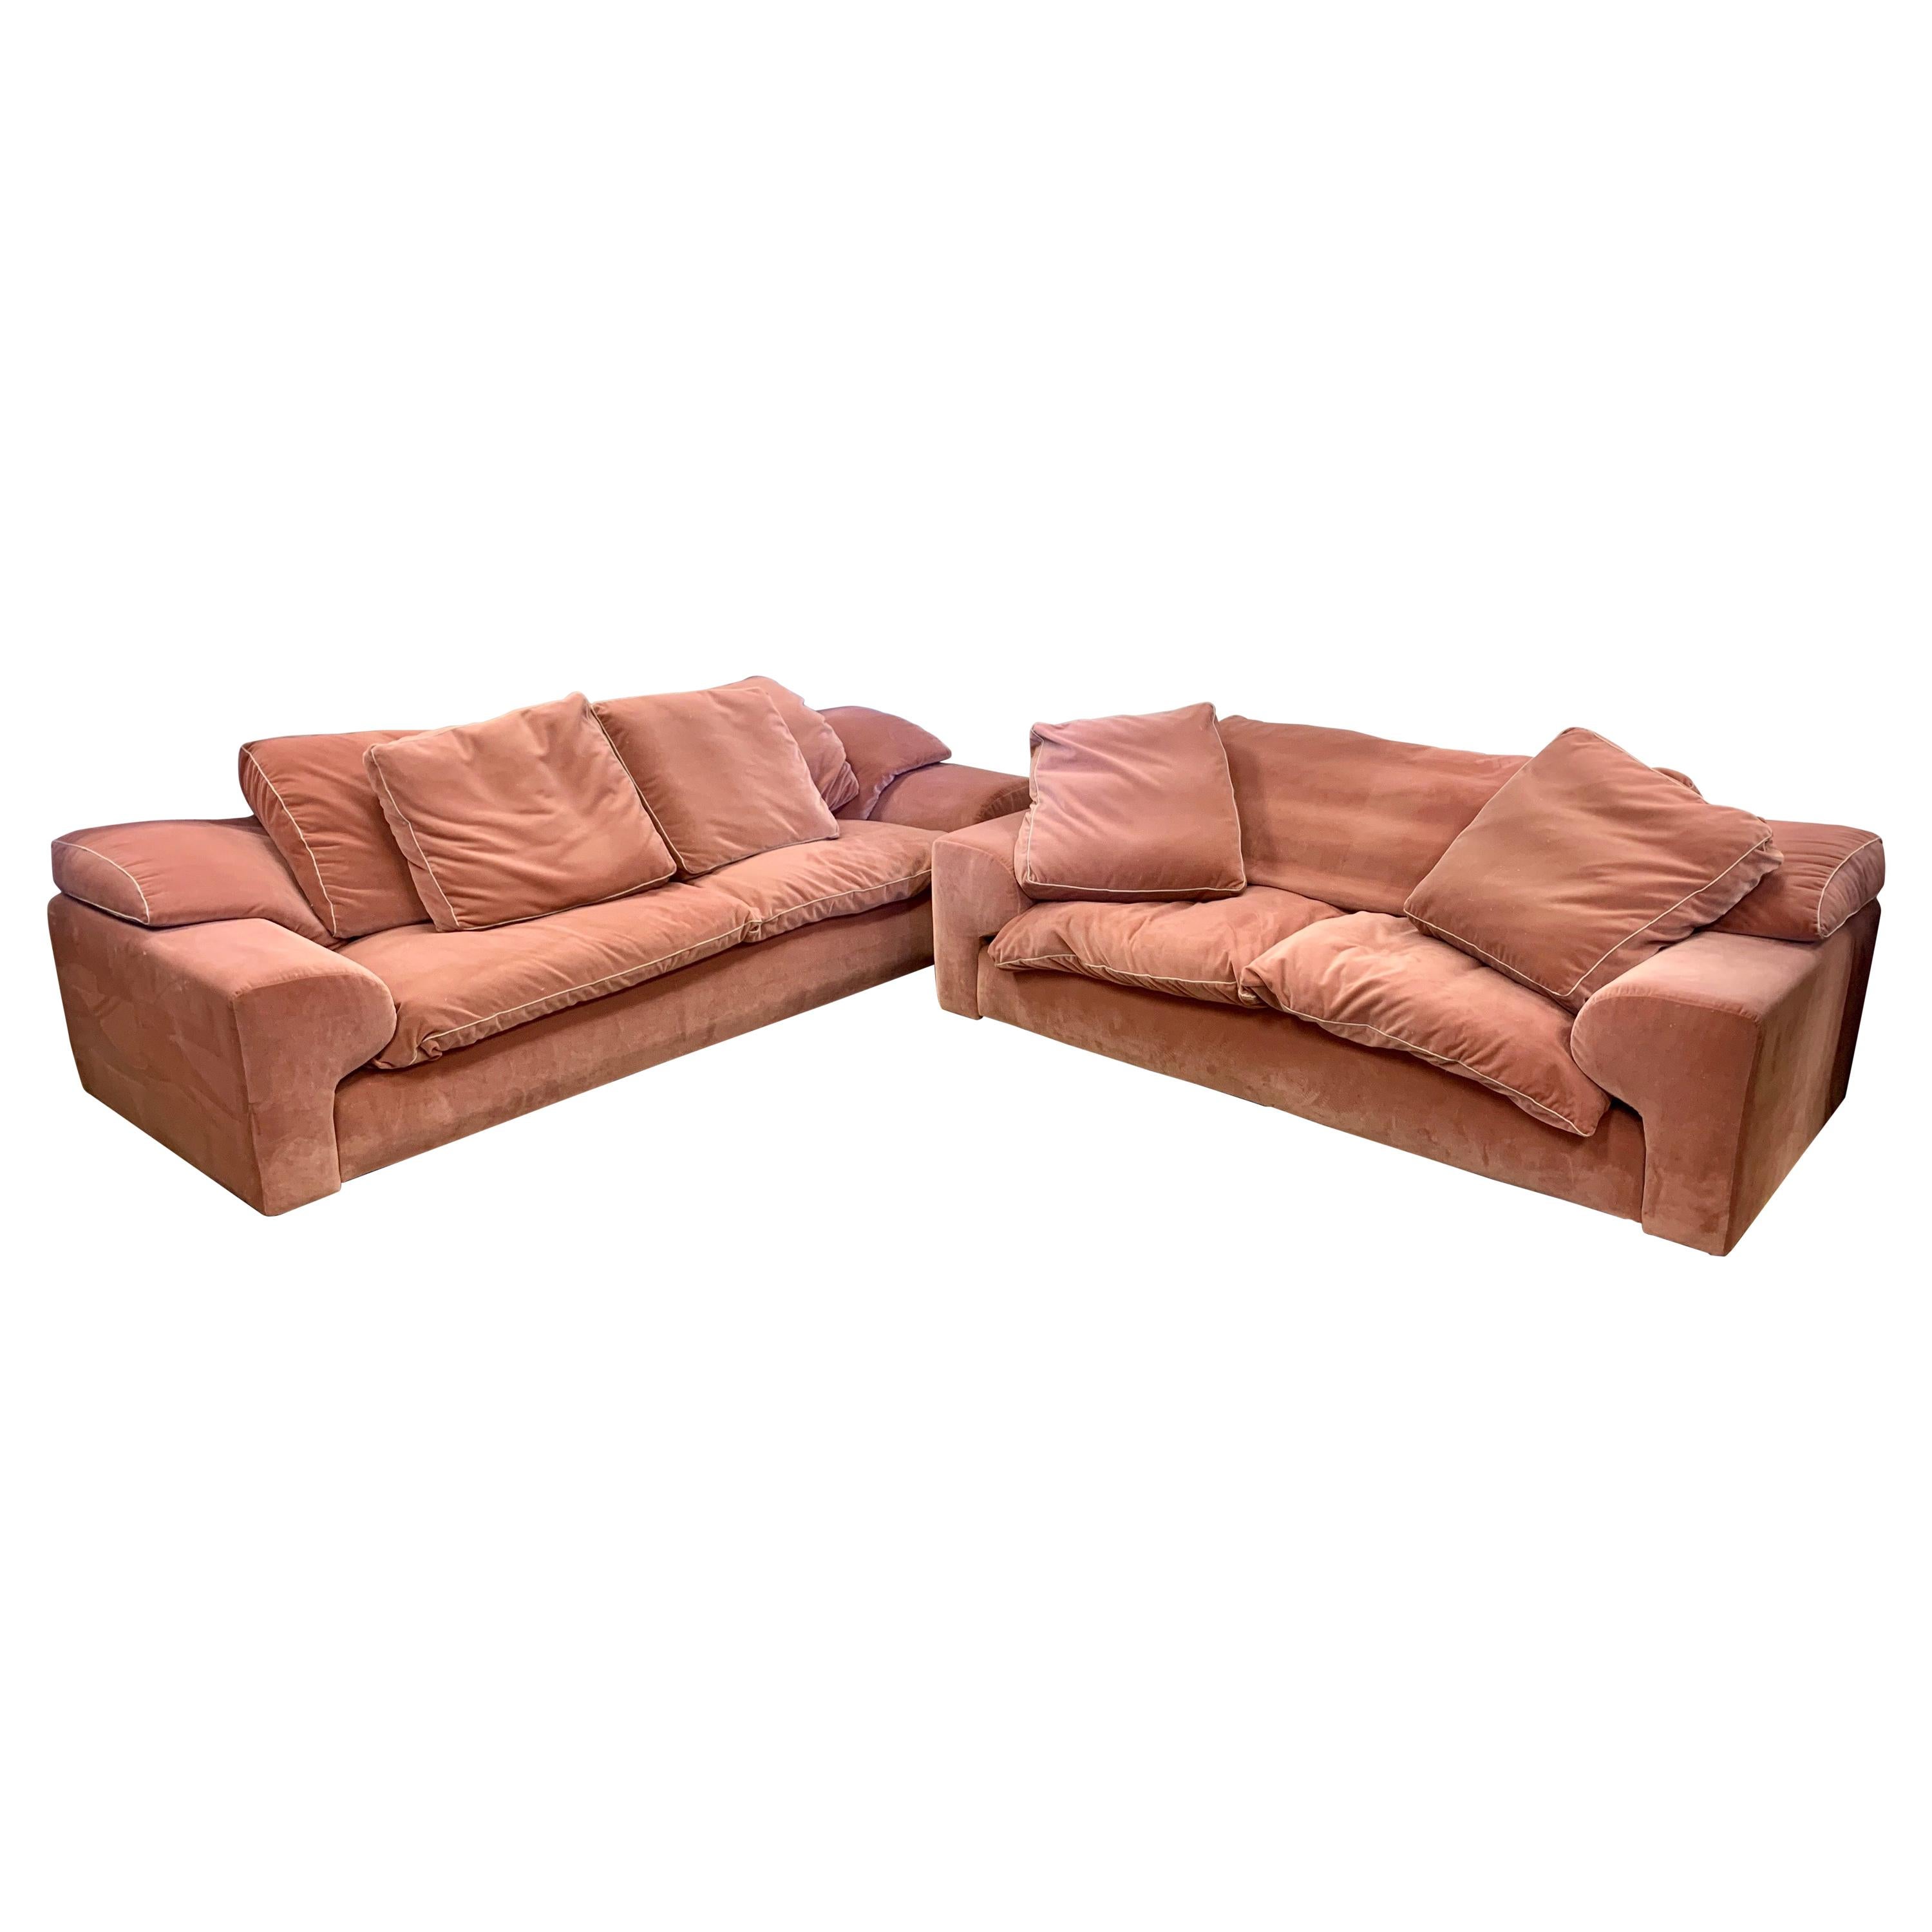 Signed Set of Roche Bobois Sofa and Matching Loveseat in Pale Pink Velvet